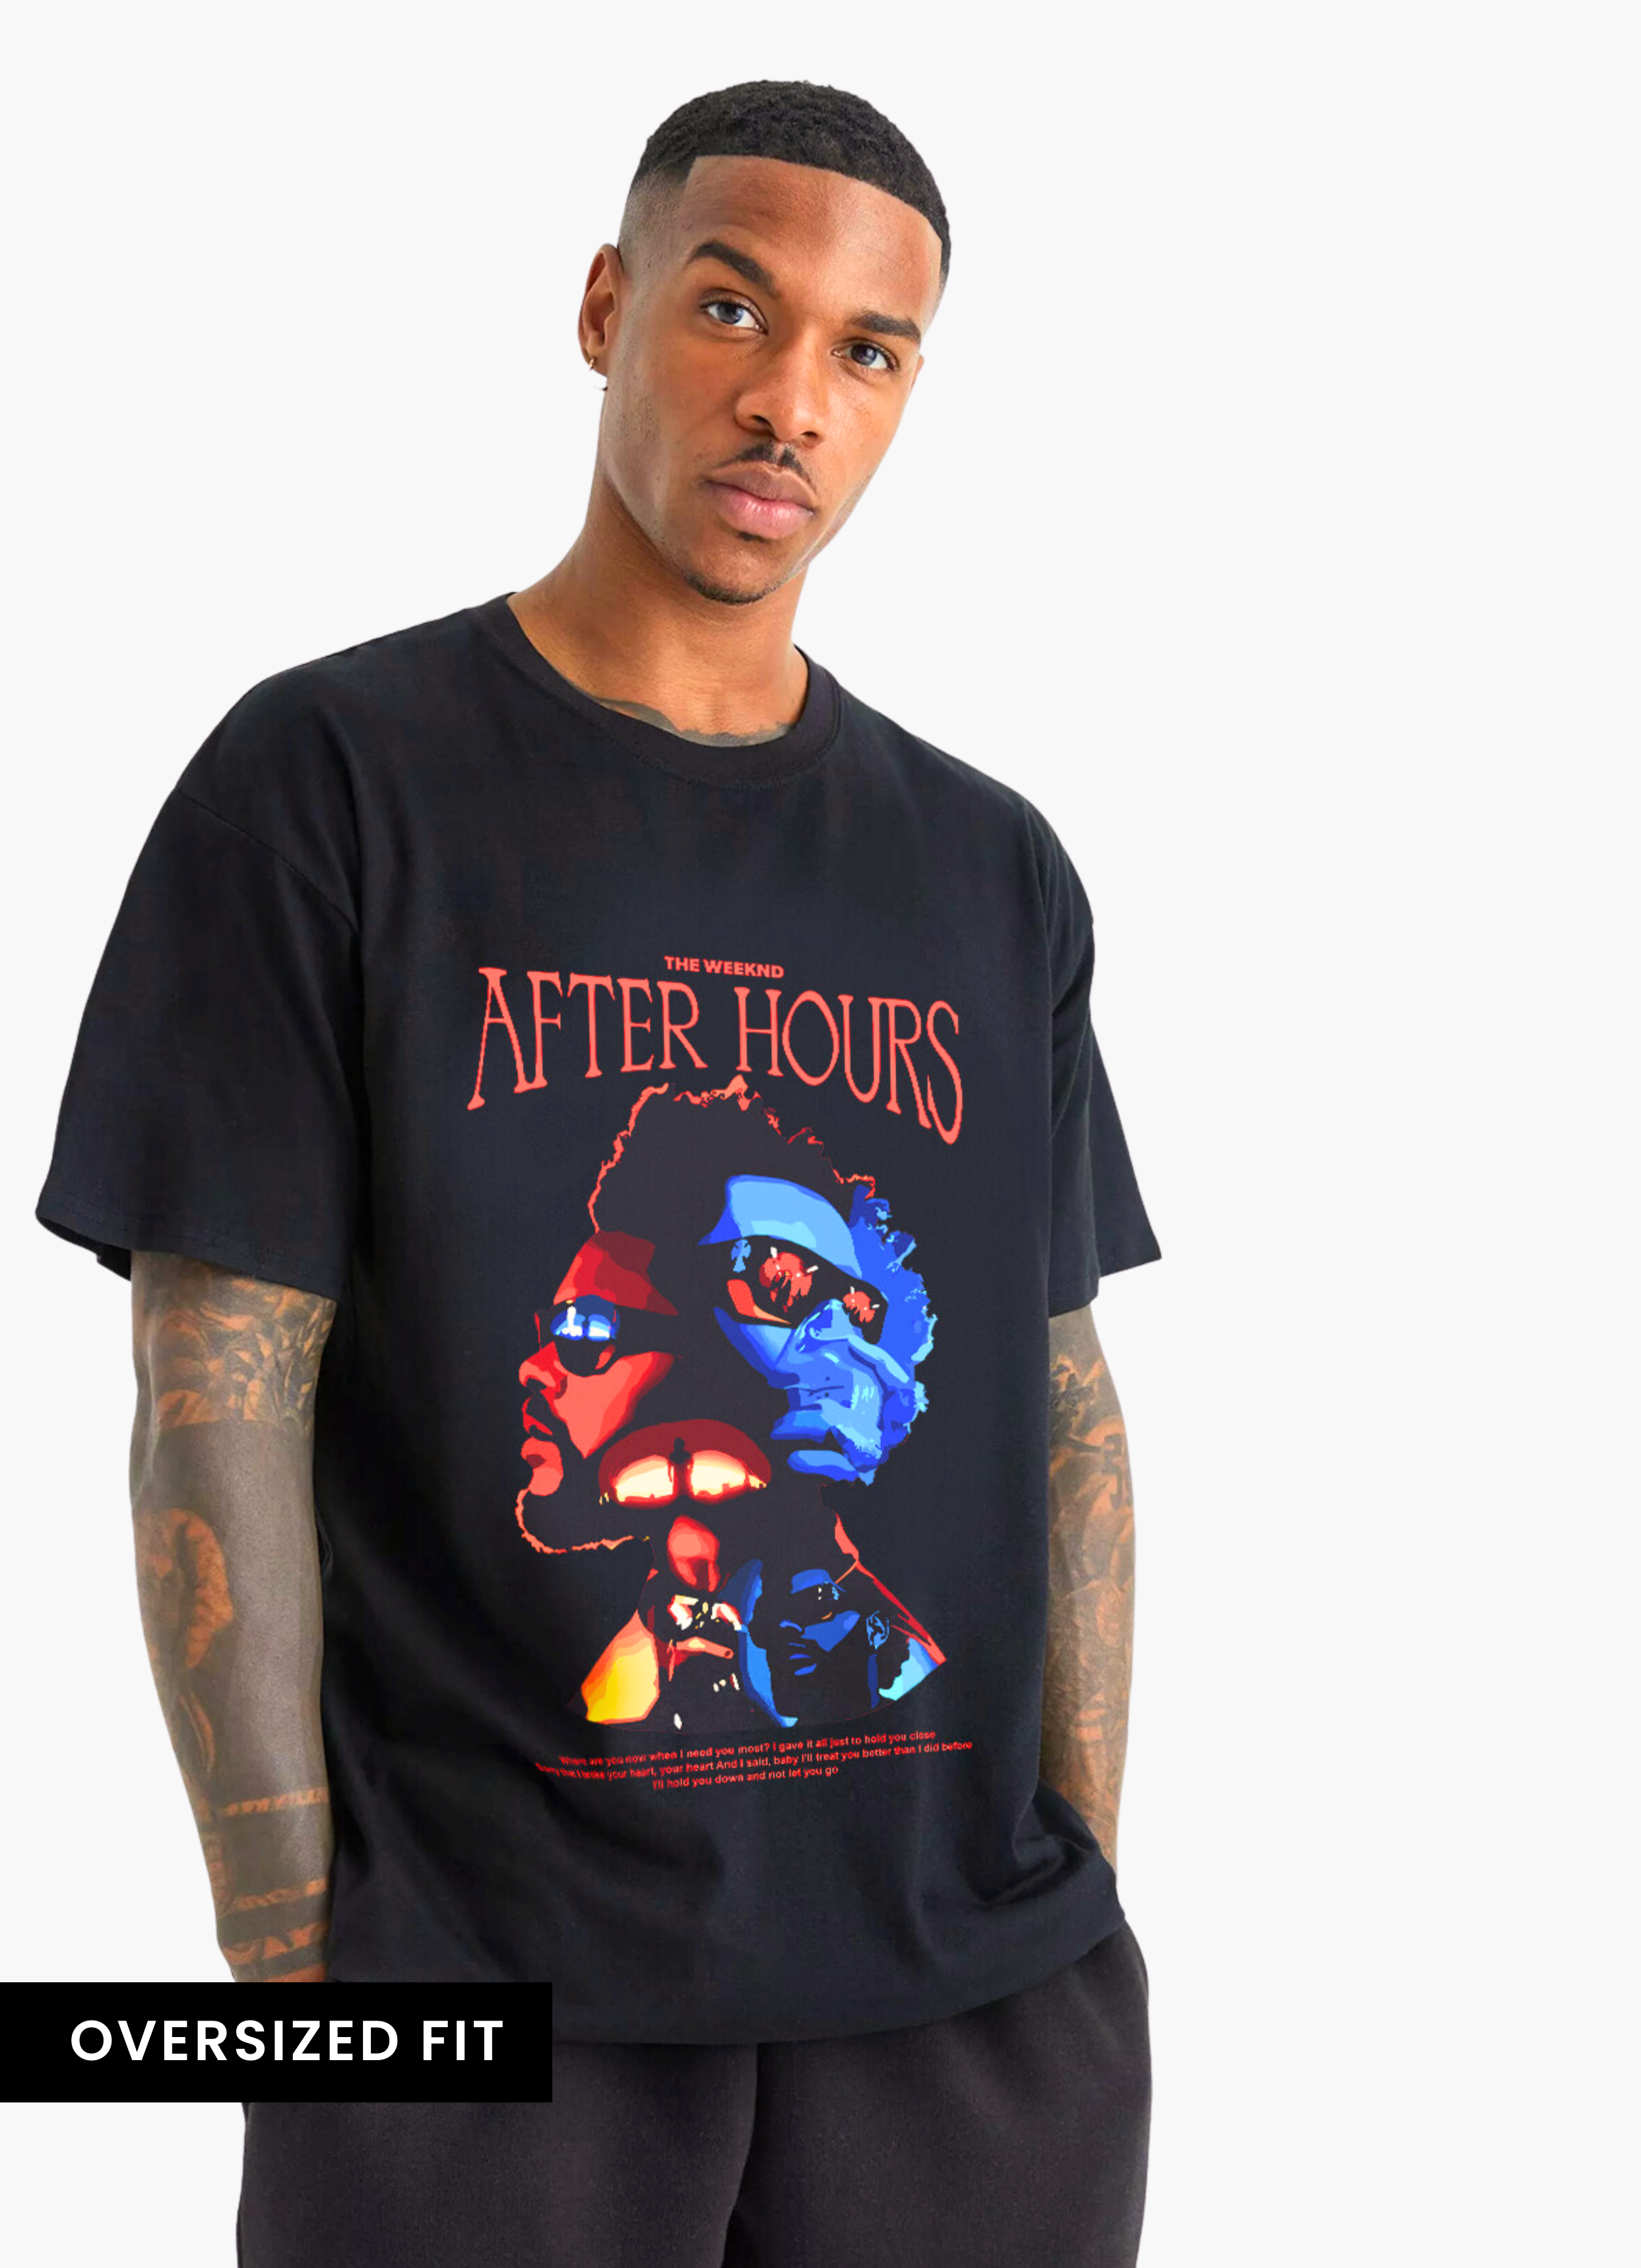 The Weeknd After Hours Oversized Unisex Tshirt